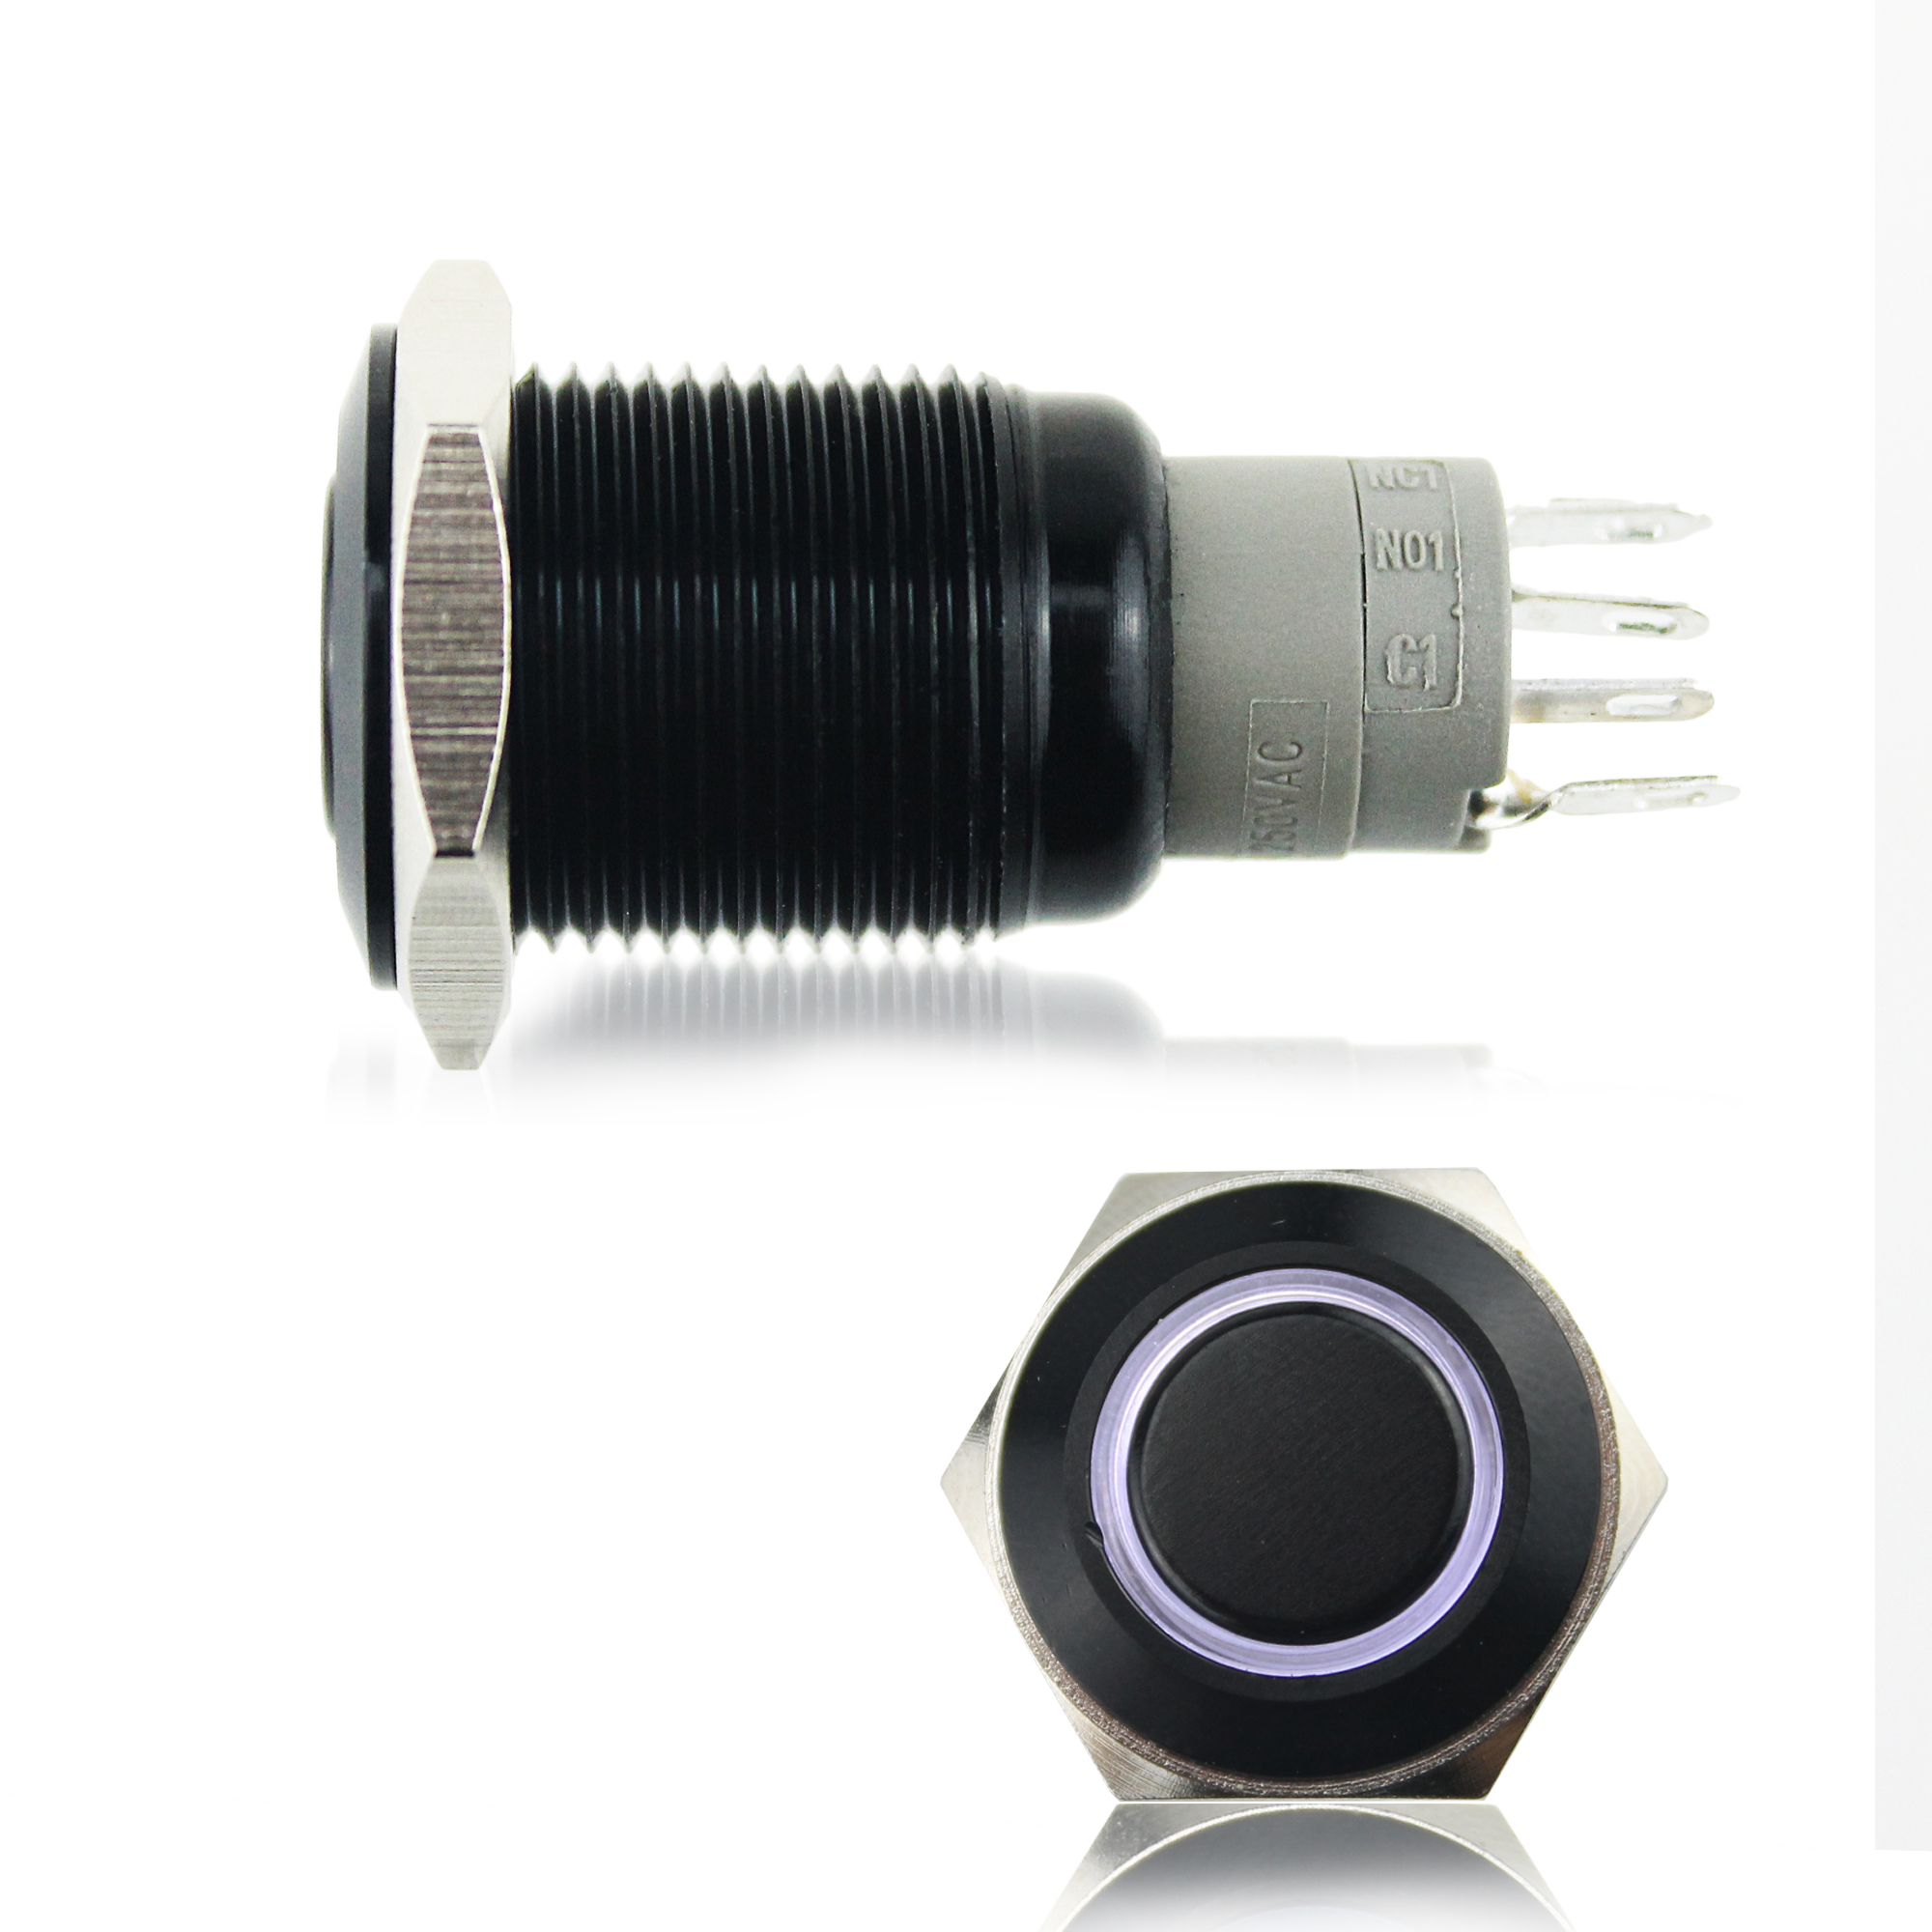  Wholesale Colorful Ring Status Indicator LED Push Button Switch